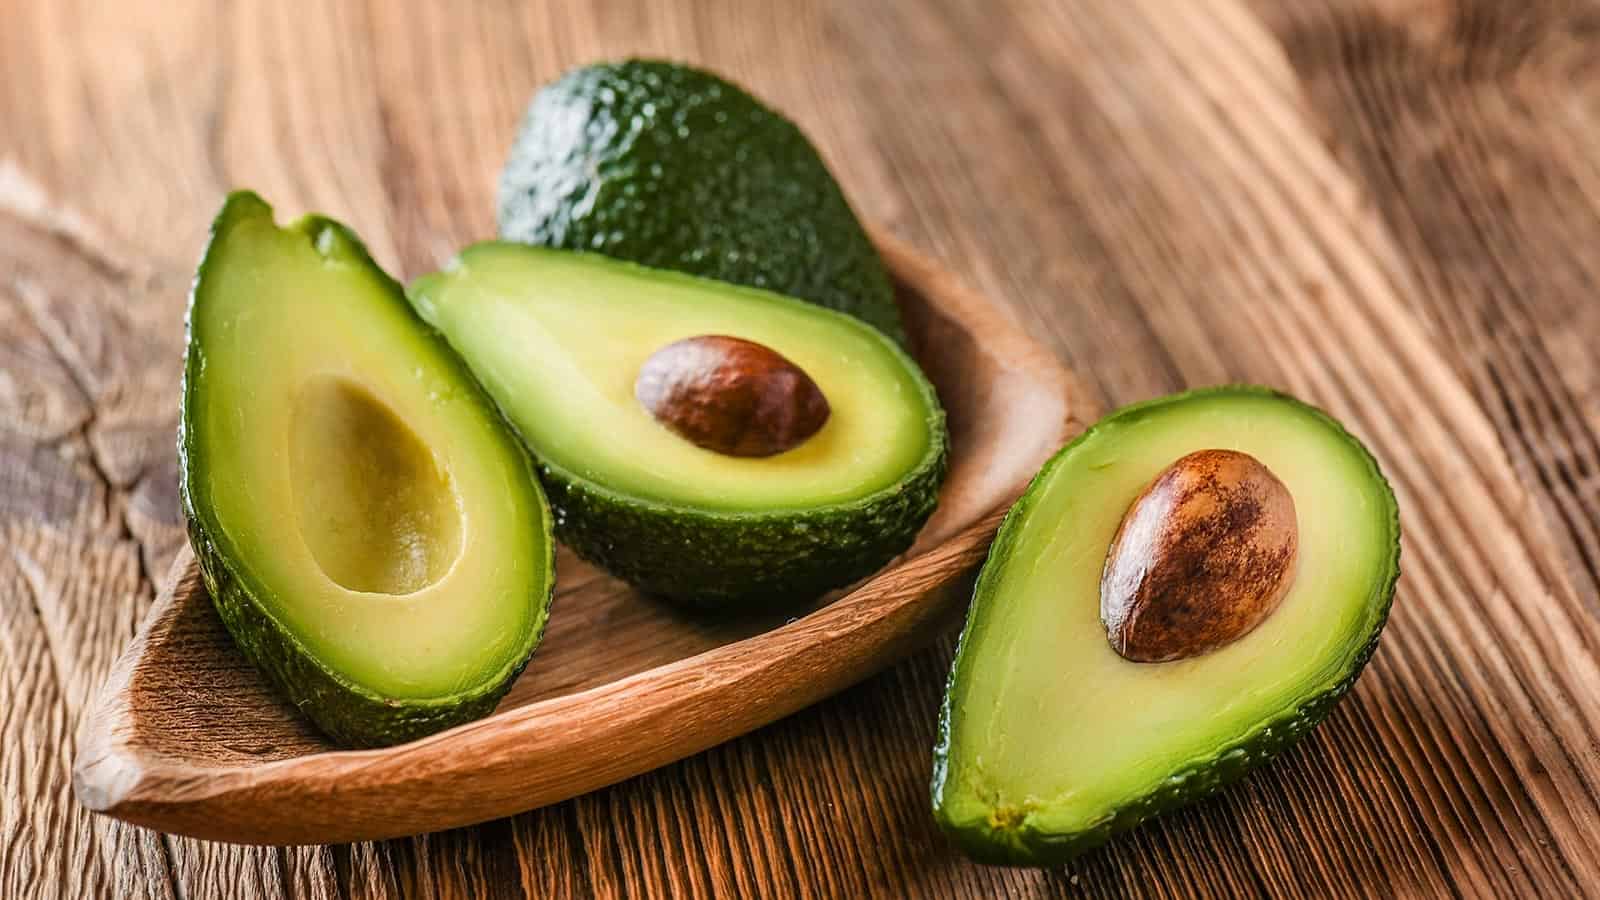 What Does Avocado Taste Like? [Definitive Guide]